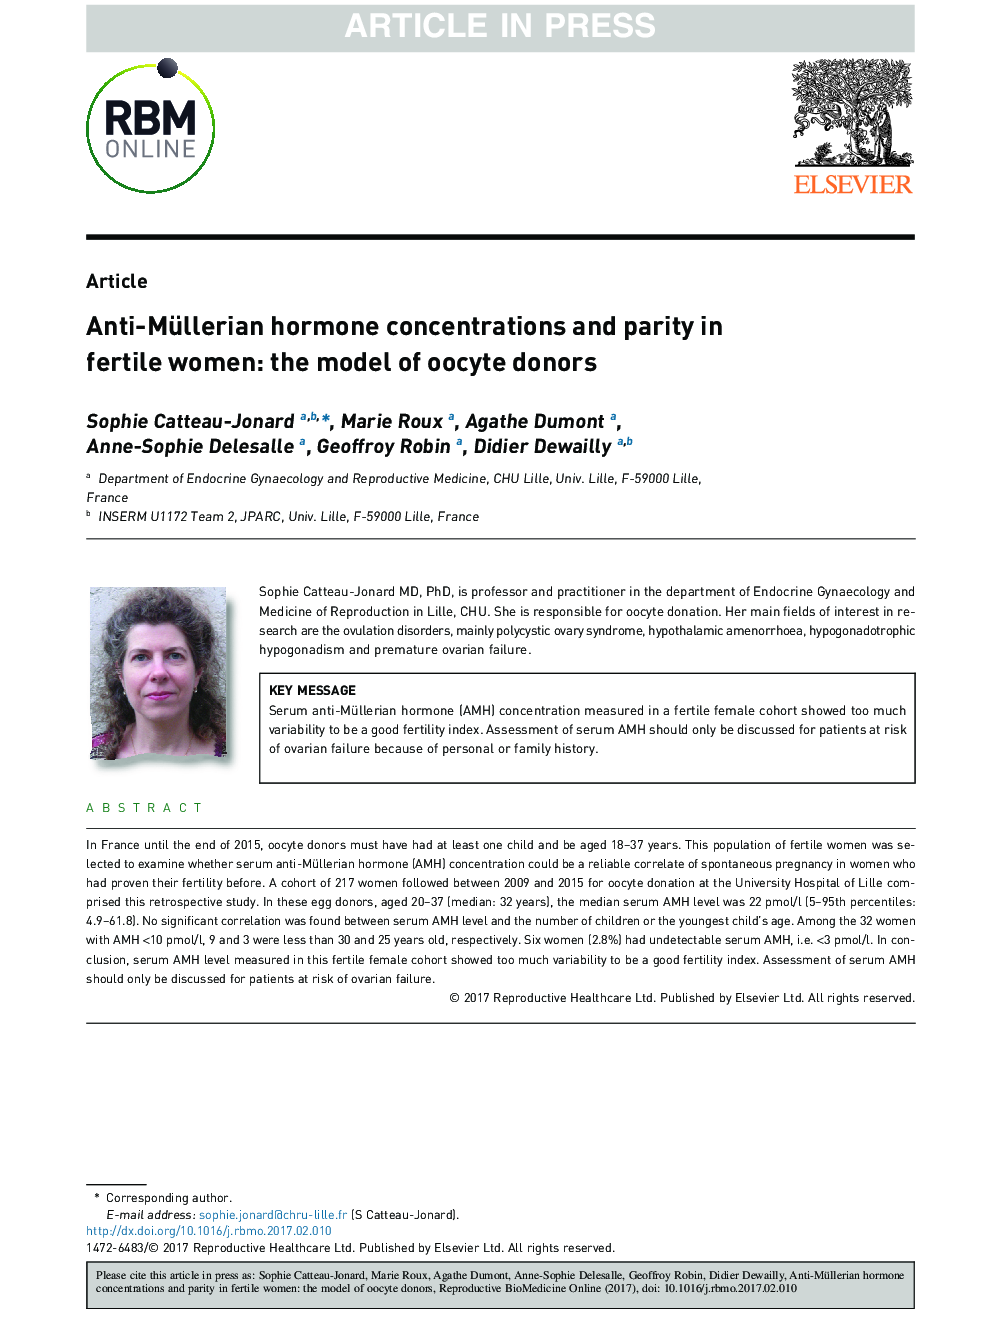 Anti-Müllerian hormone concentrations and parity in fertile women: the model of oocyte donors